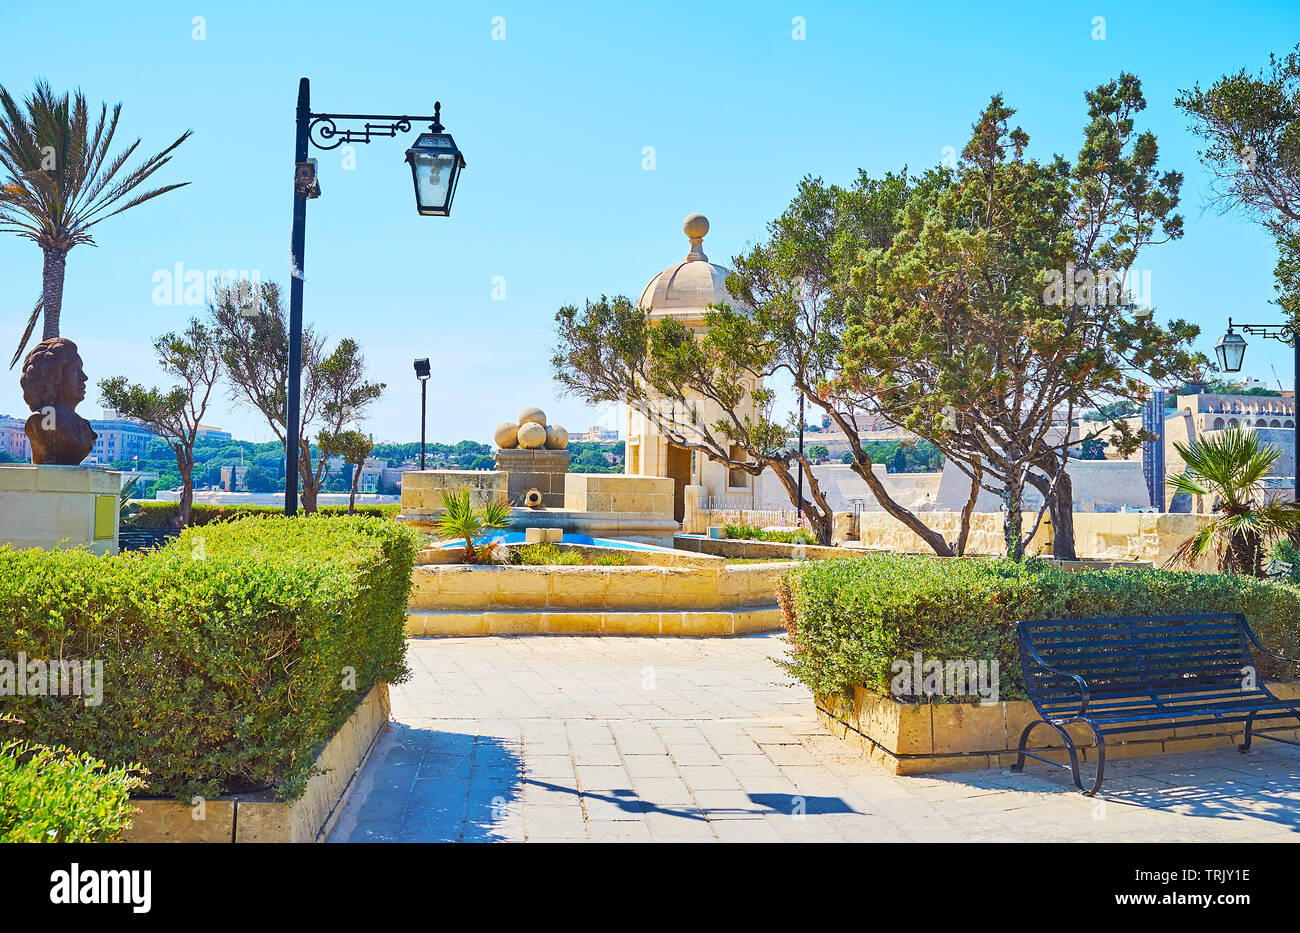 The scenic Gardjola Gardens, located on the upper level of fortress wall, decorated with stone cannon balls and trimmed bushes, Senglea, Malta. Stock Photo